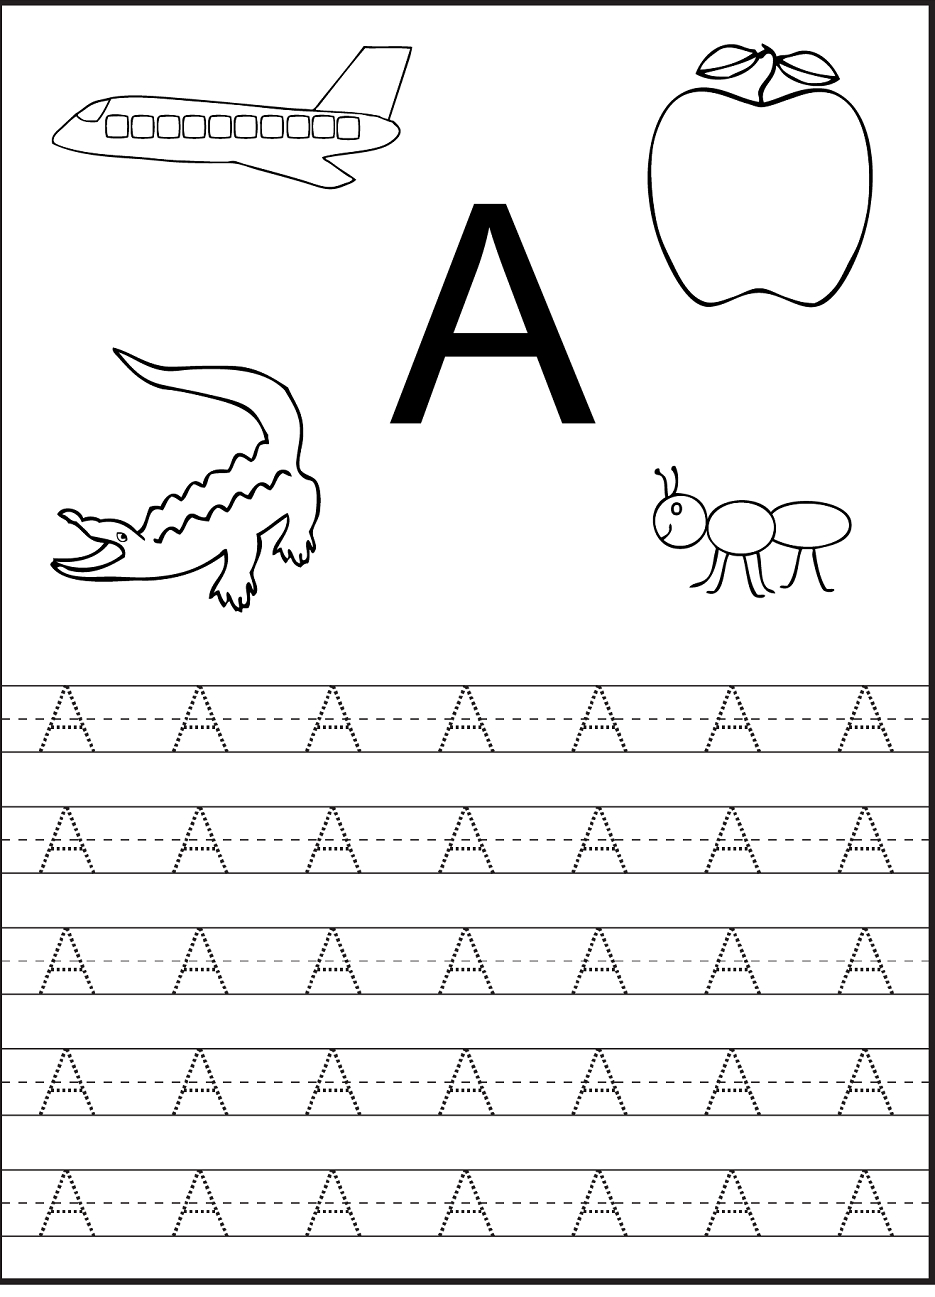 Tracing The Letter A Free Printable | Preschool Worksheets intended for Tracing Letters Free Worksheets